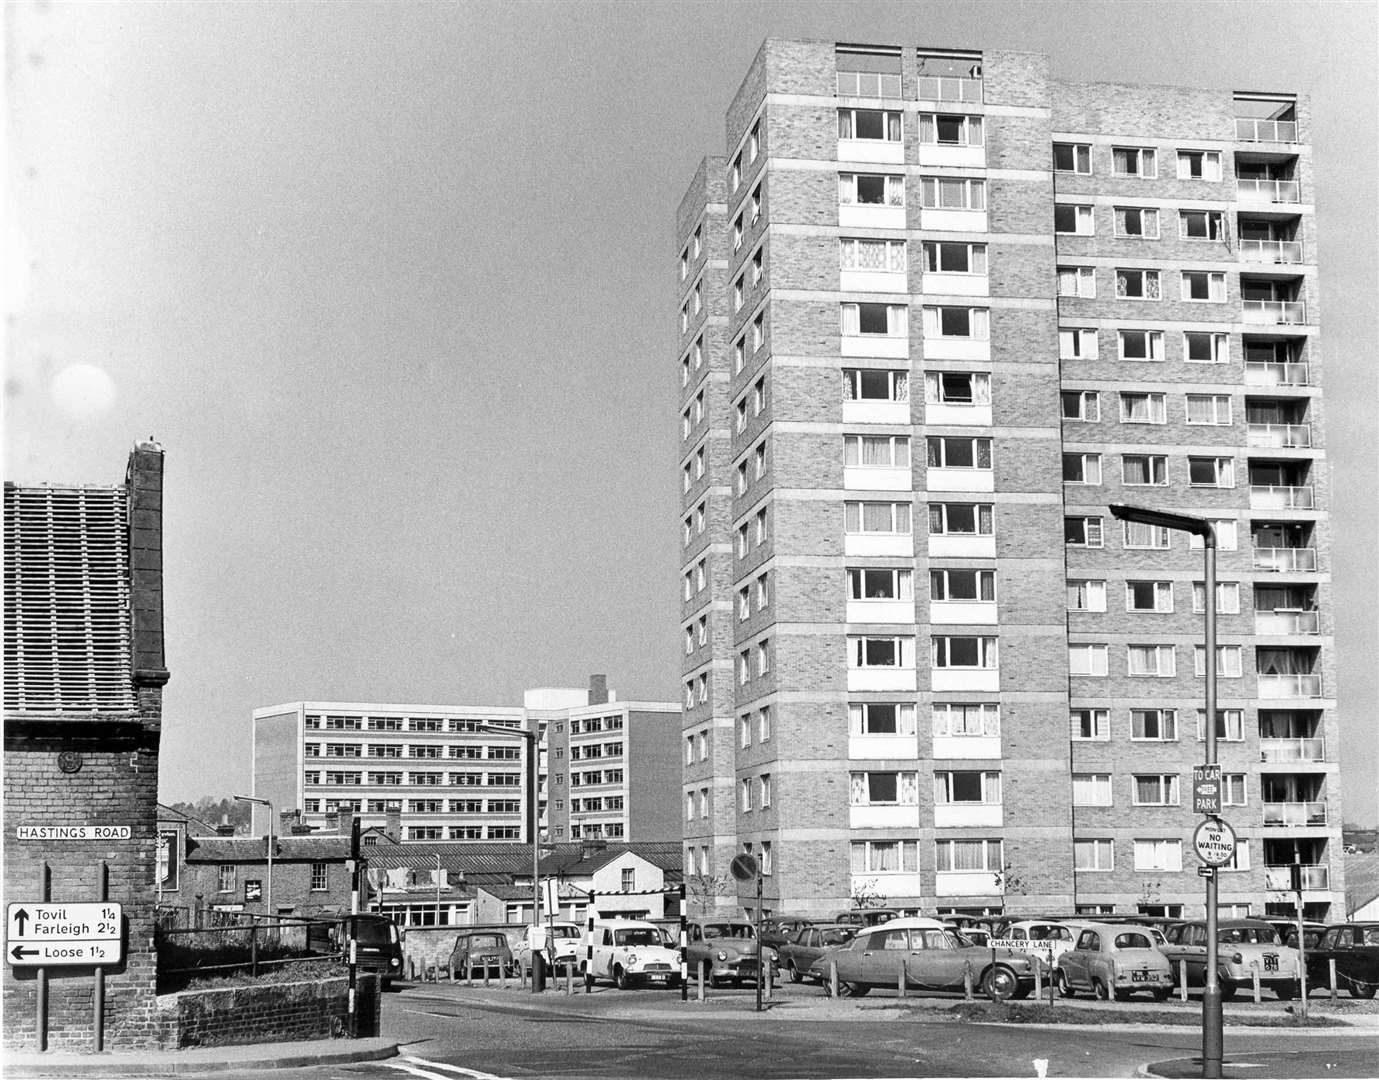 The flats at Mote Road, Maidstone, in May 1970